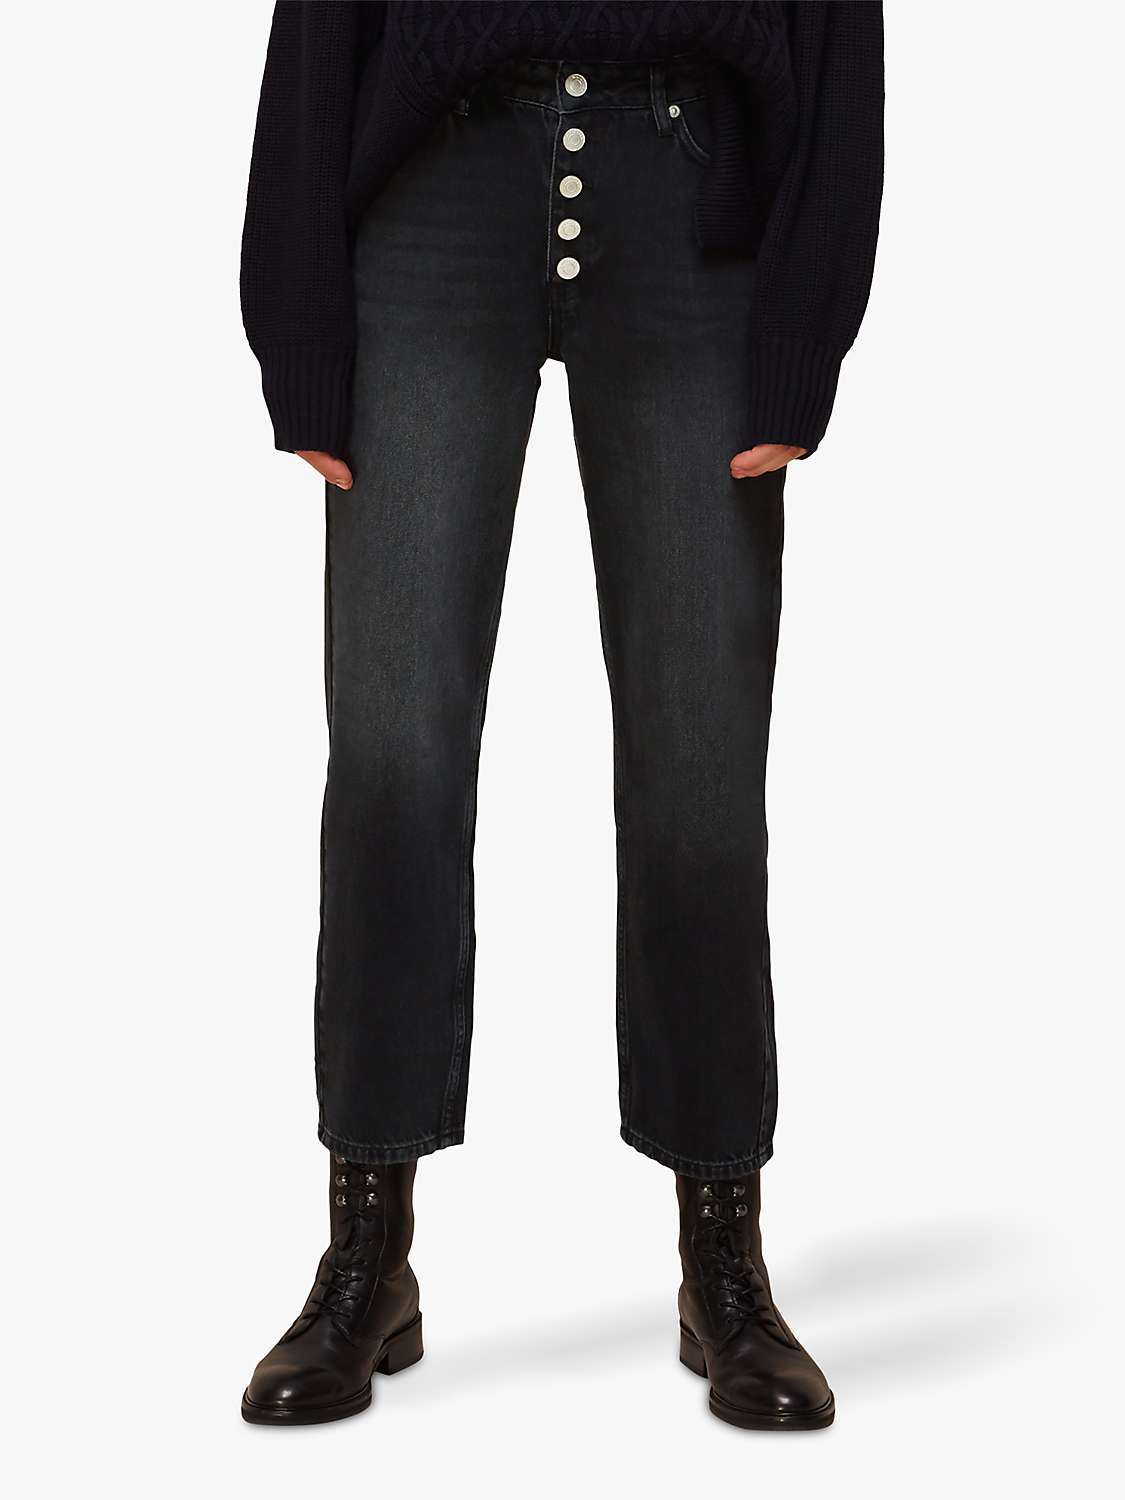 Buy Whistles Hollie Button Front Jeans Online at johnlewis.com